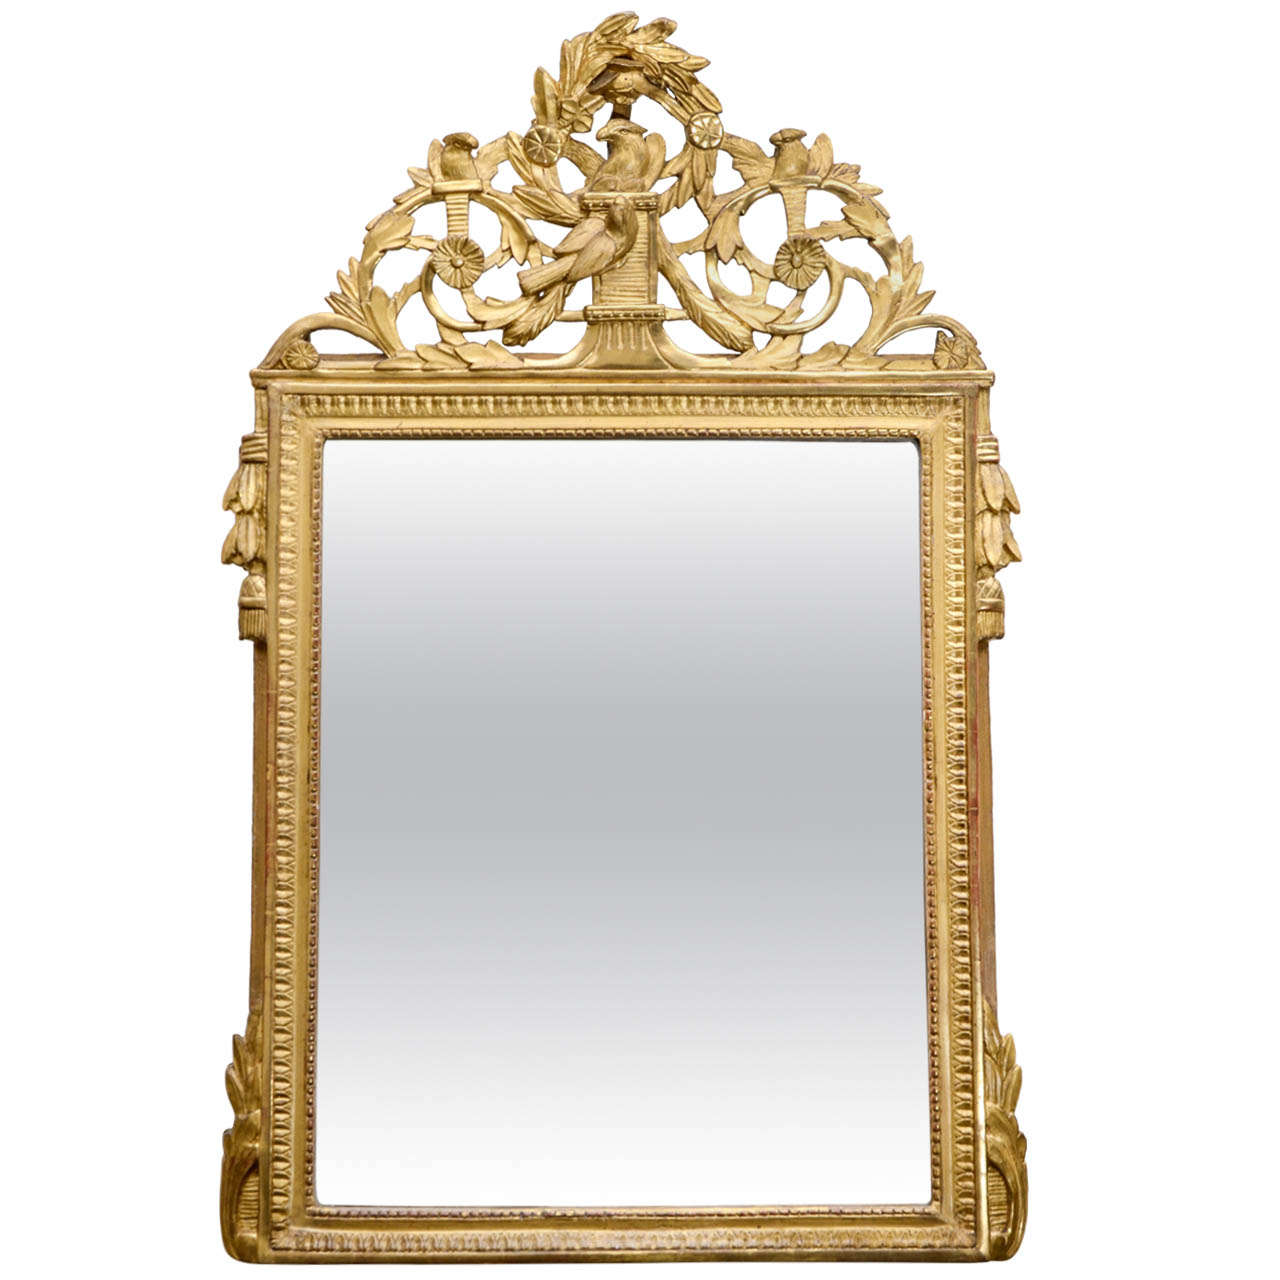 End of 18th Century Carved and Gilded Wood Mirror For Sale